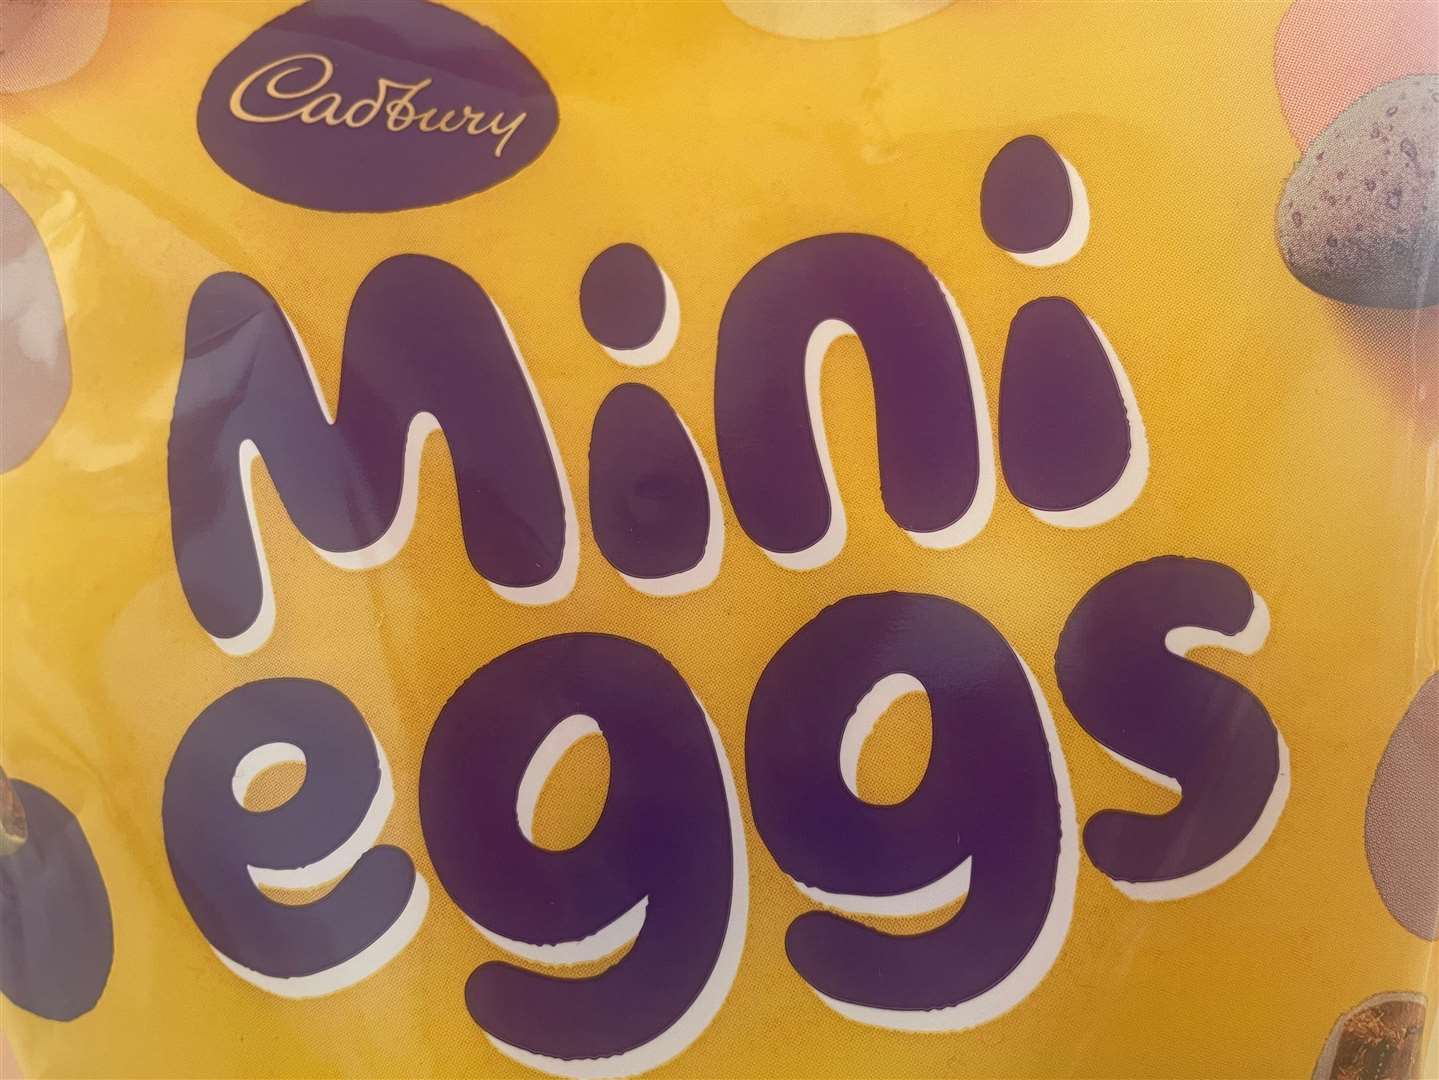 The Child Accident Prevention Trust is reminding parents not to give mini eggs to small children